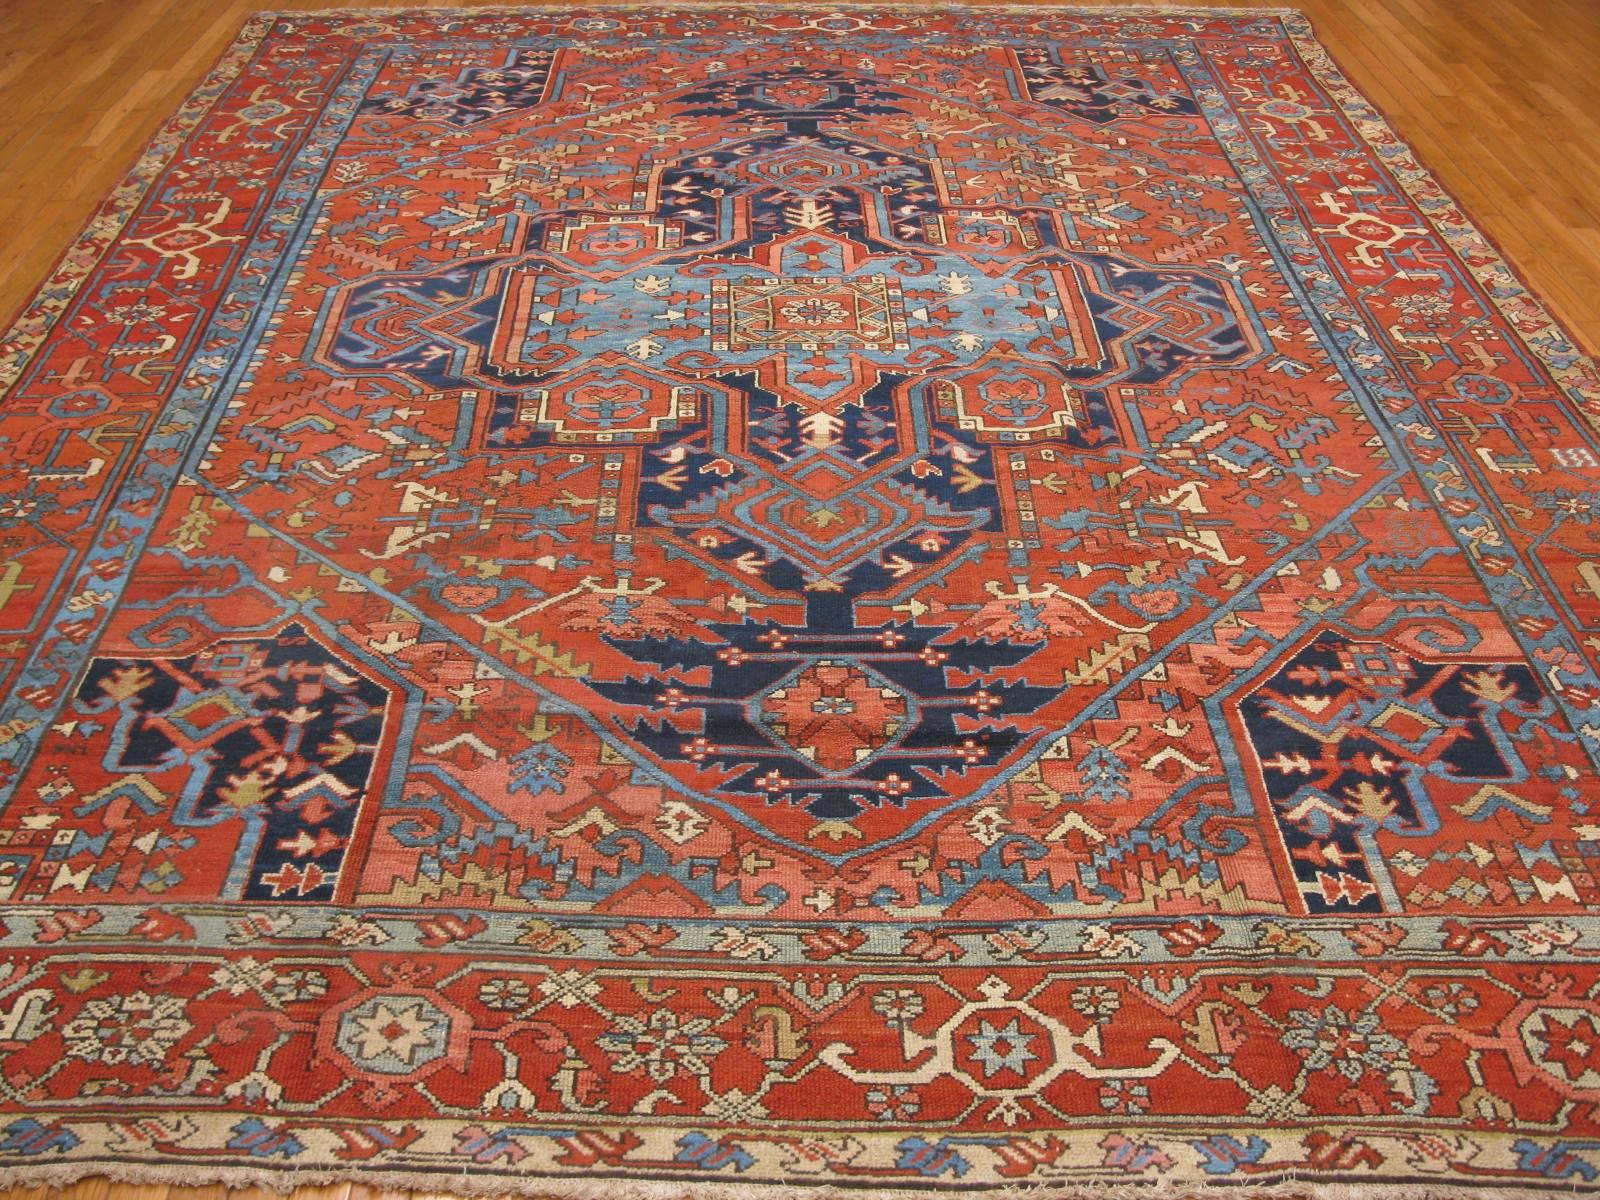 This is a room size traditional hand-knotted antique Persian Serapi rug in rich warm brick red color contrasted by navy blue medallion and corners. It is a perfect choice for almost any room in your home or office. The rug measures 9' 6'' x 12'